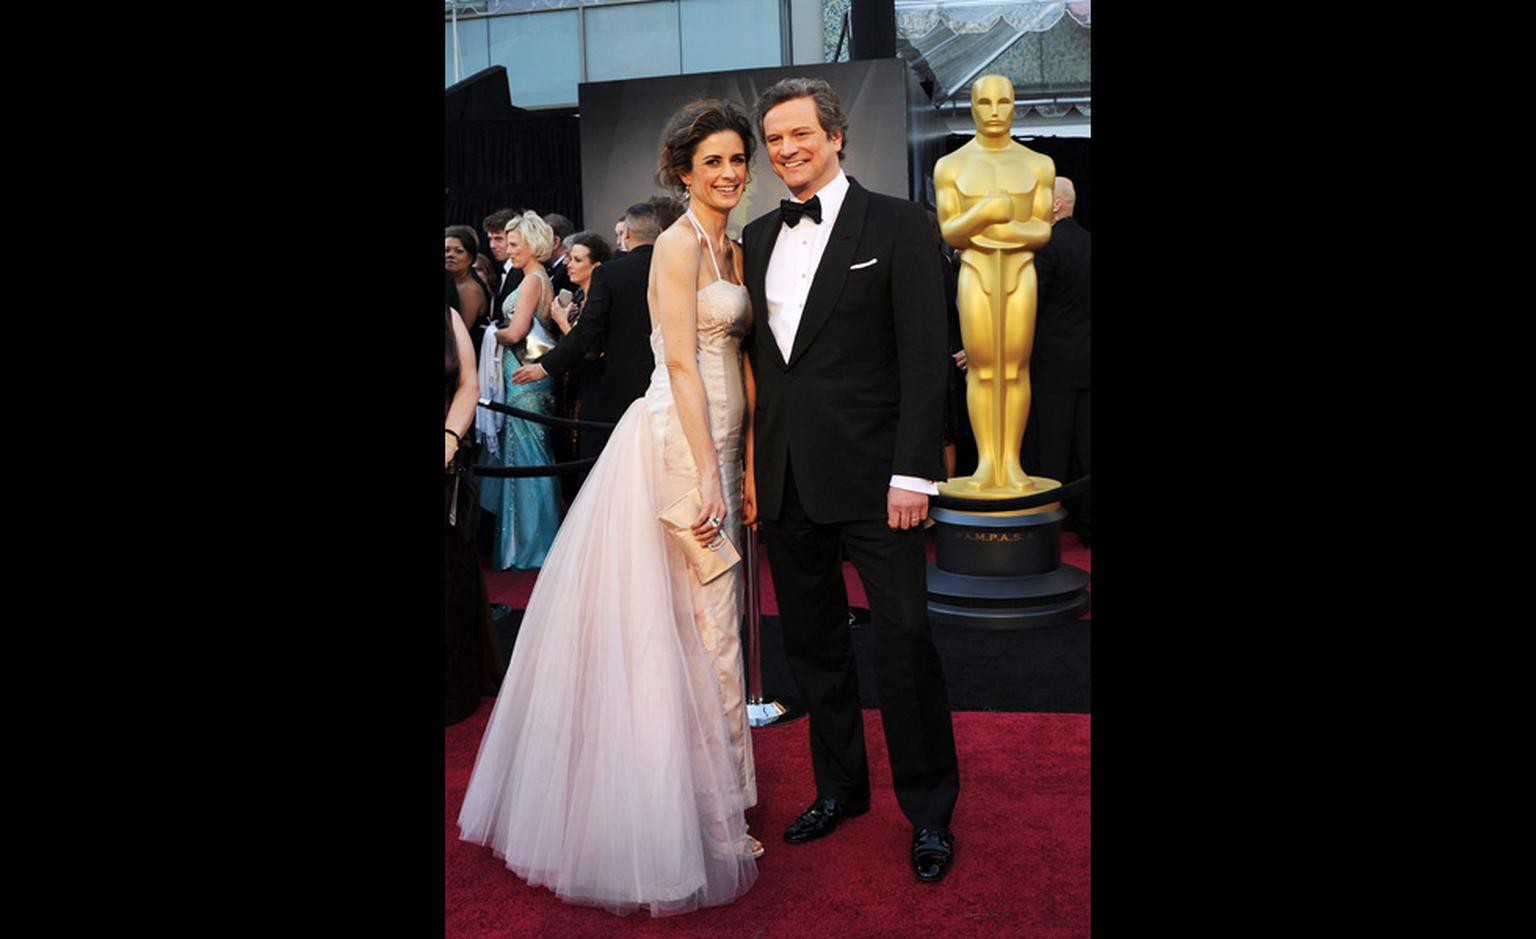 Livia First wore the first pair of earrings made from Fairtrade gold to be seen at the Oscars.